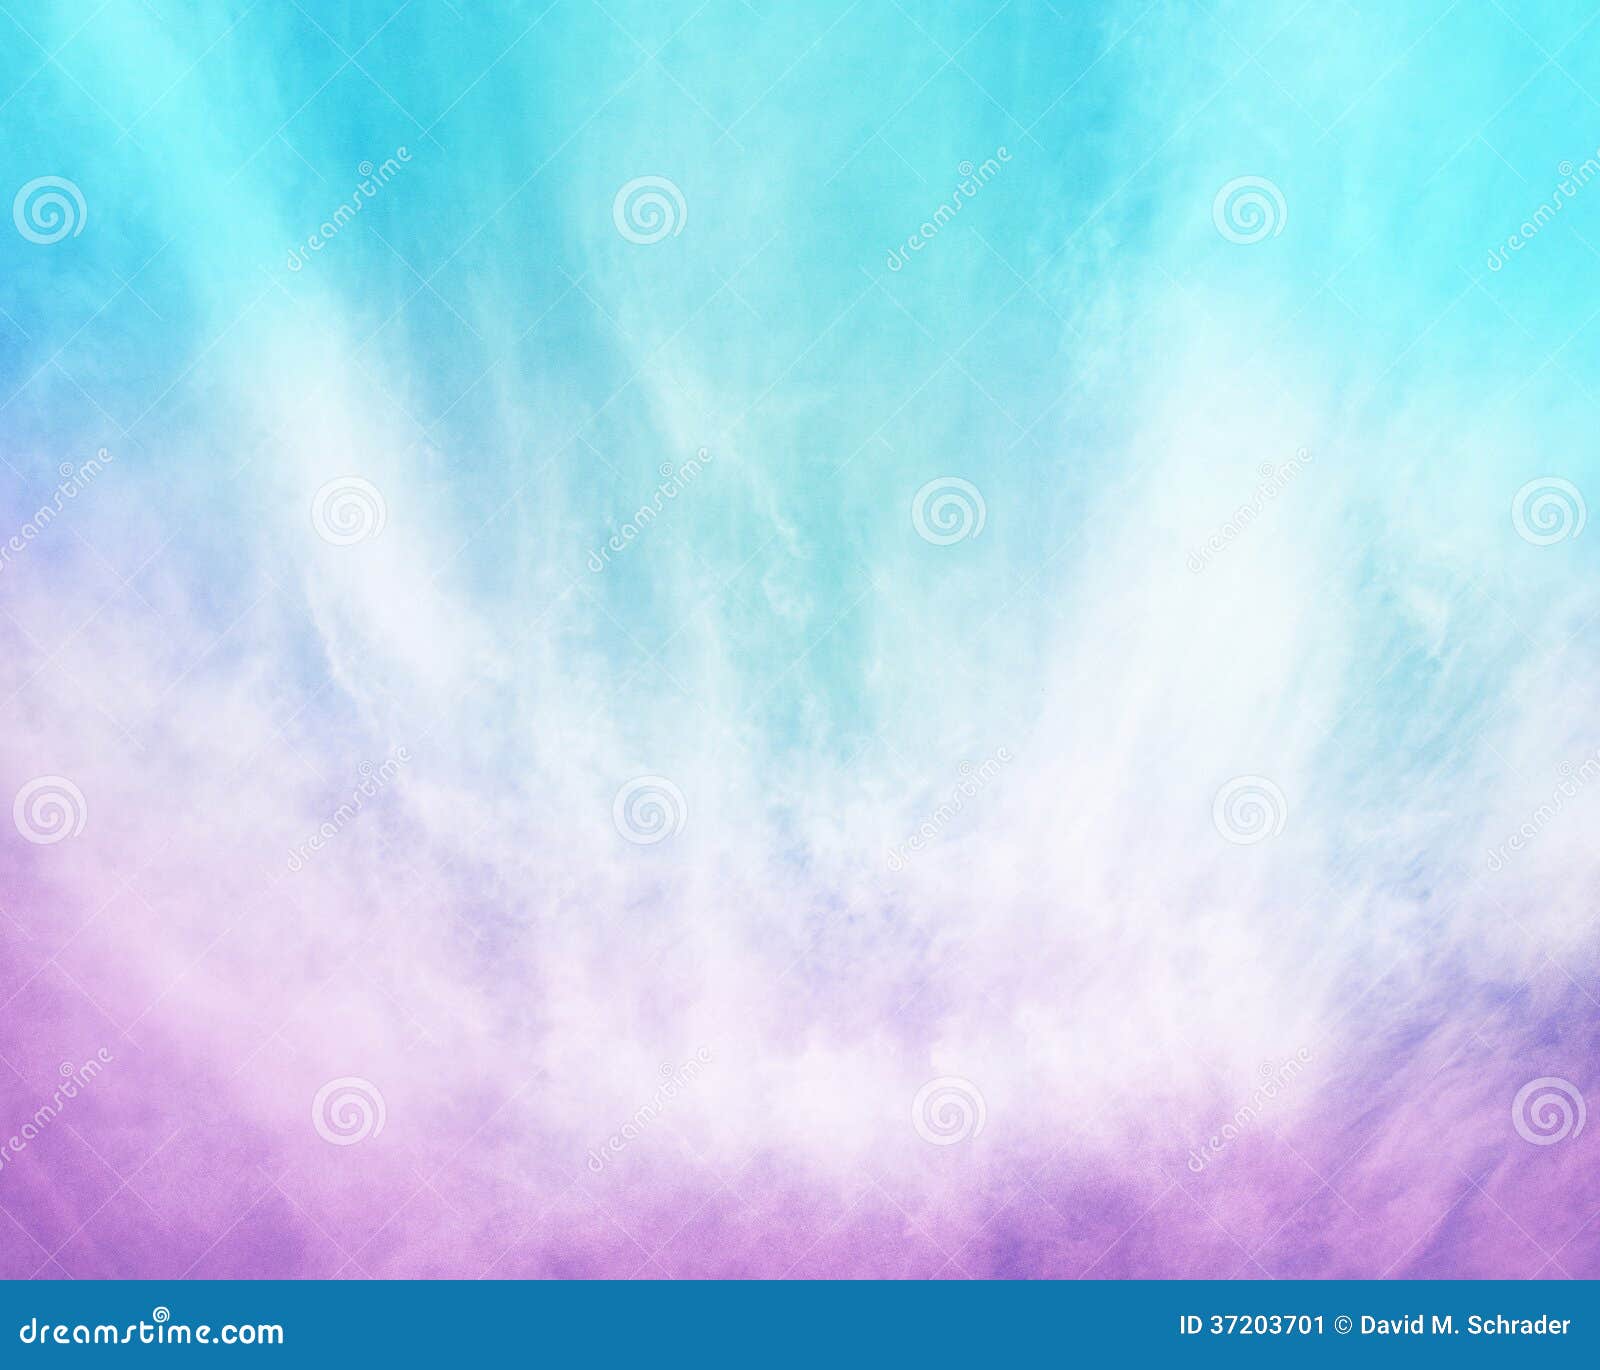 Purple Blue Cloud Abstract stock image. Image of abstract - 37203701